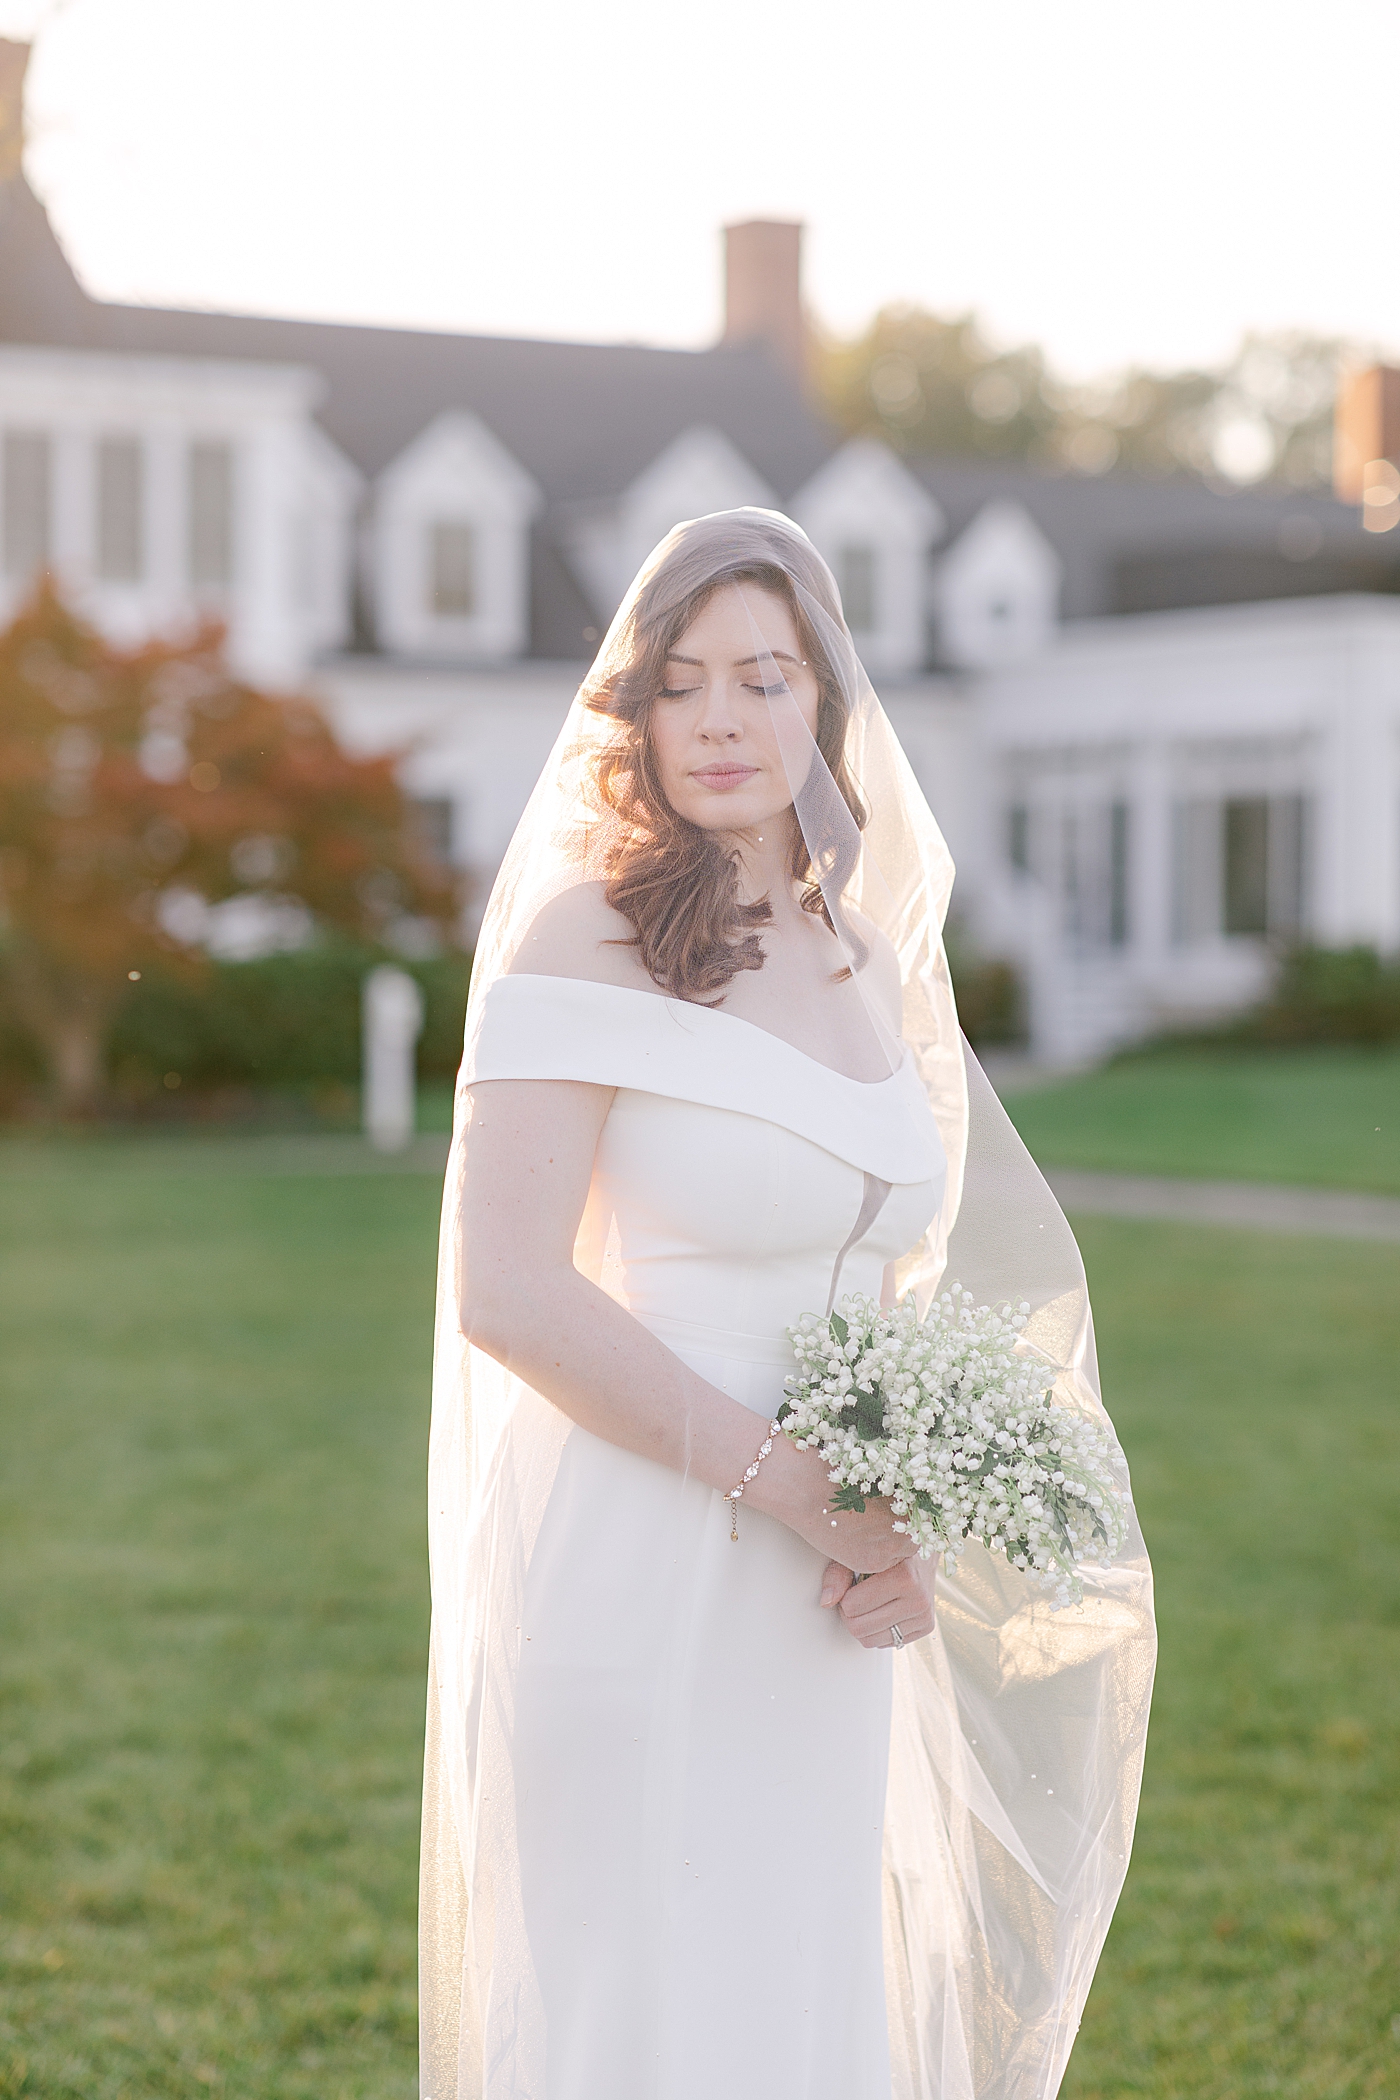 Bride posing for a portrait after her Inn at perry cabin wedding | Photo by Hope Helmuth Photography